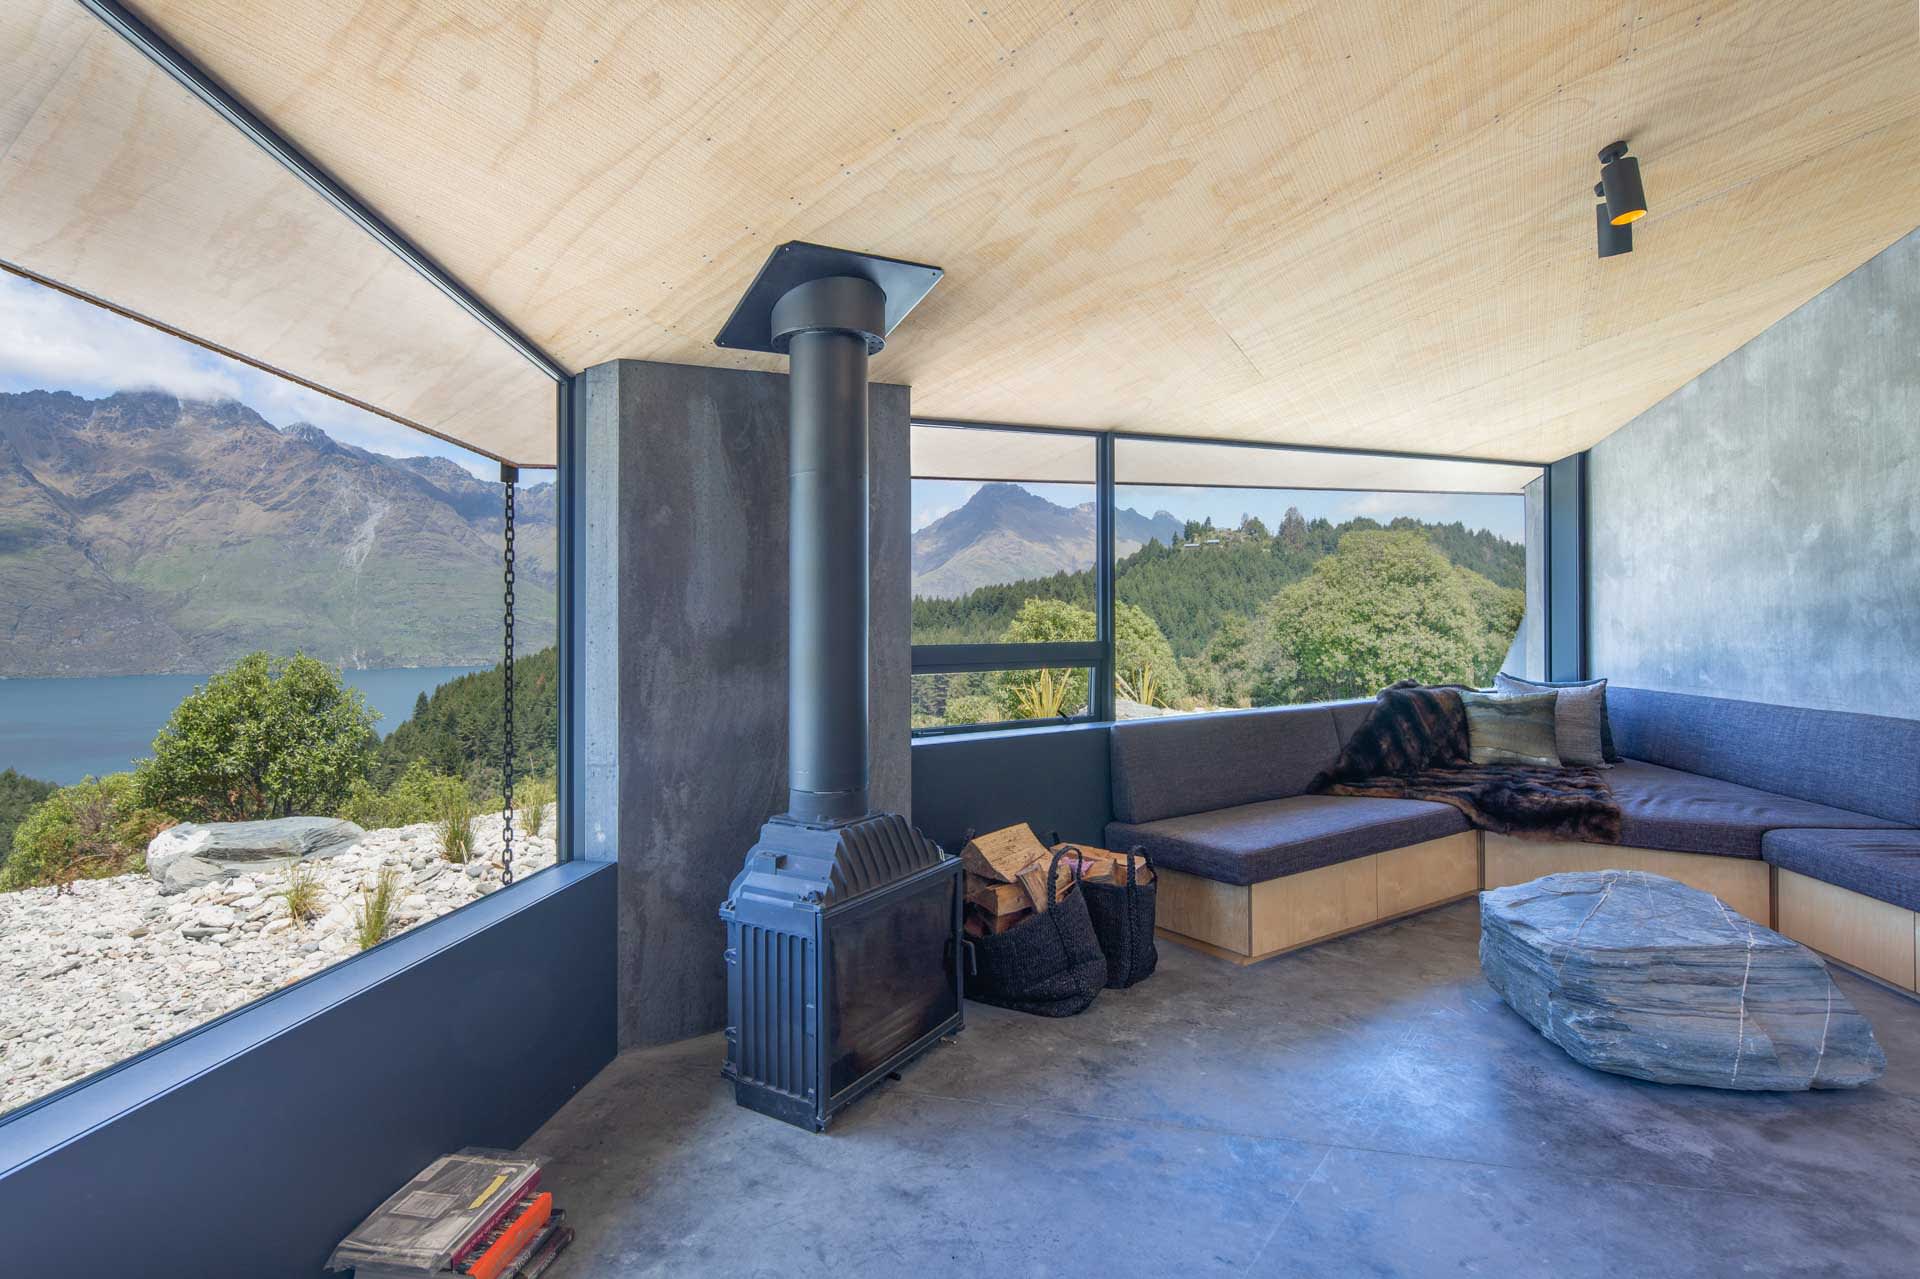 Fire place with stunning views